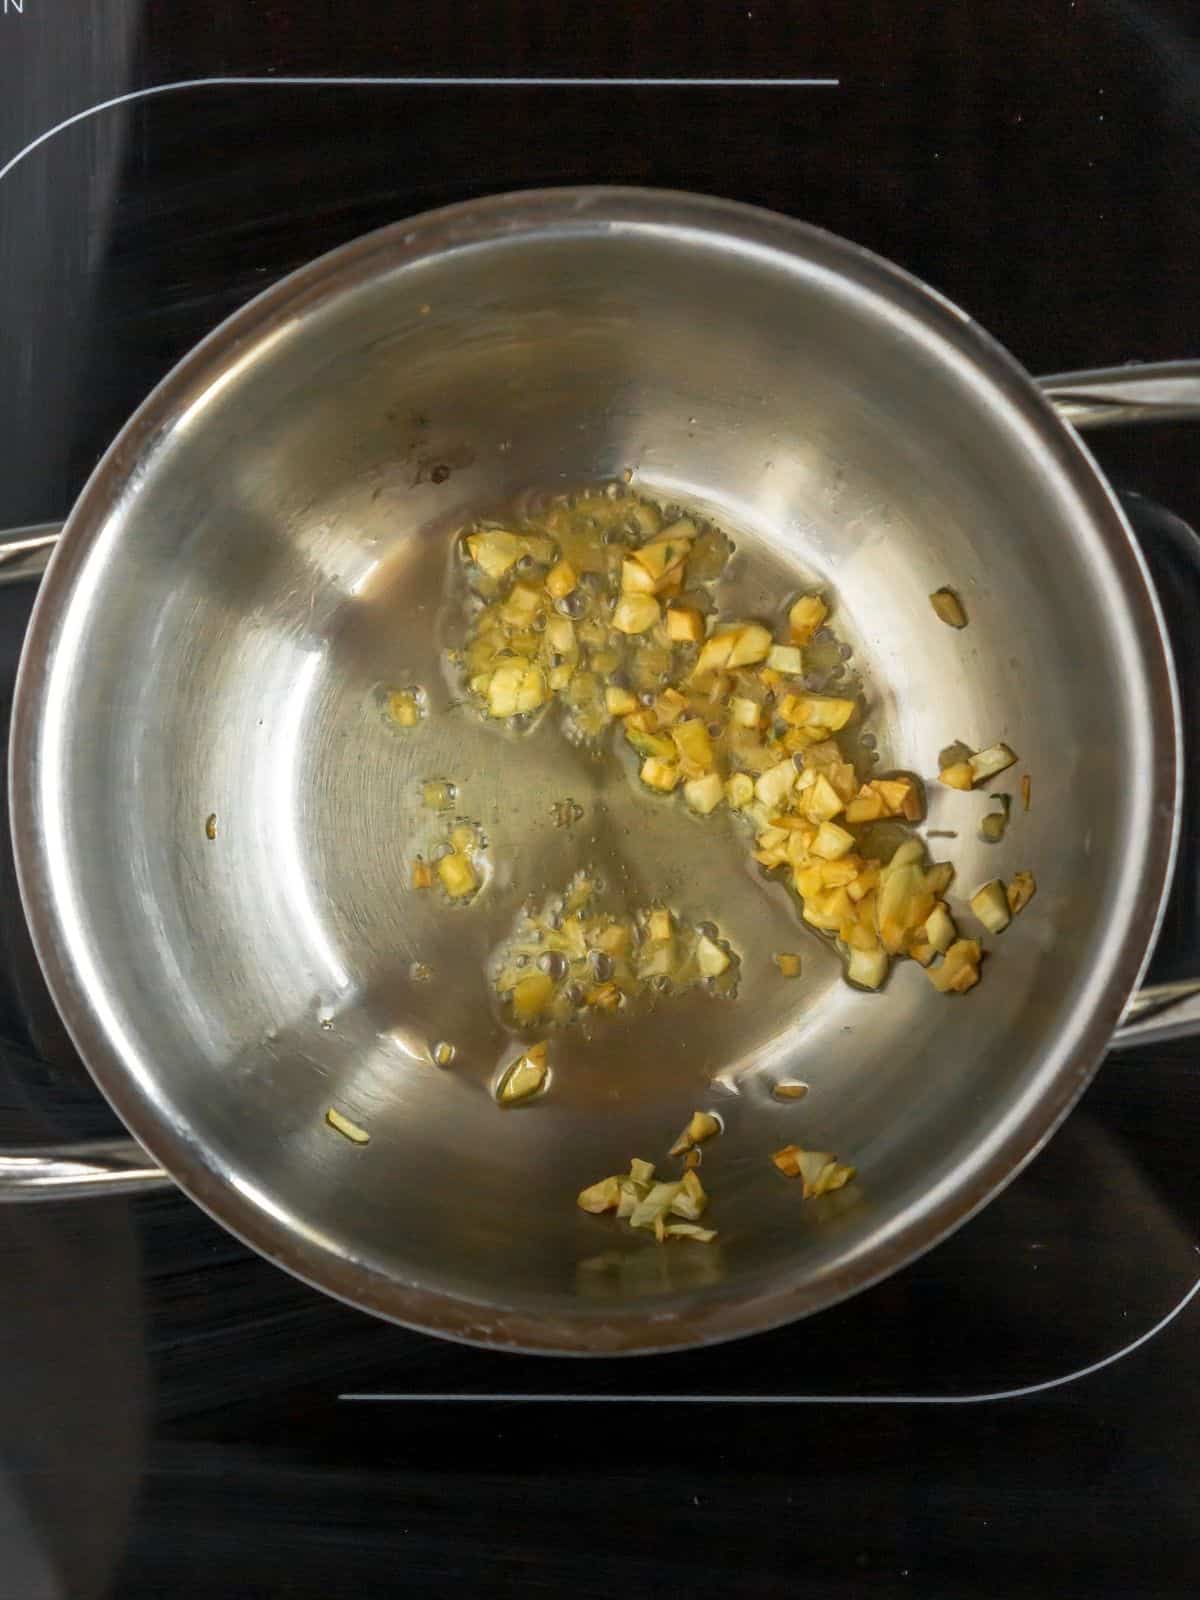 garlic and ginger cooking in frying pan.